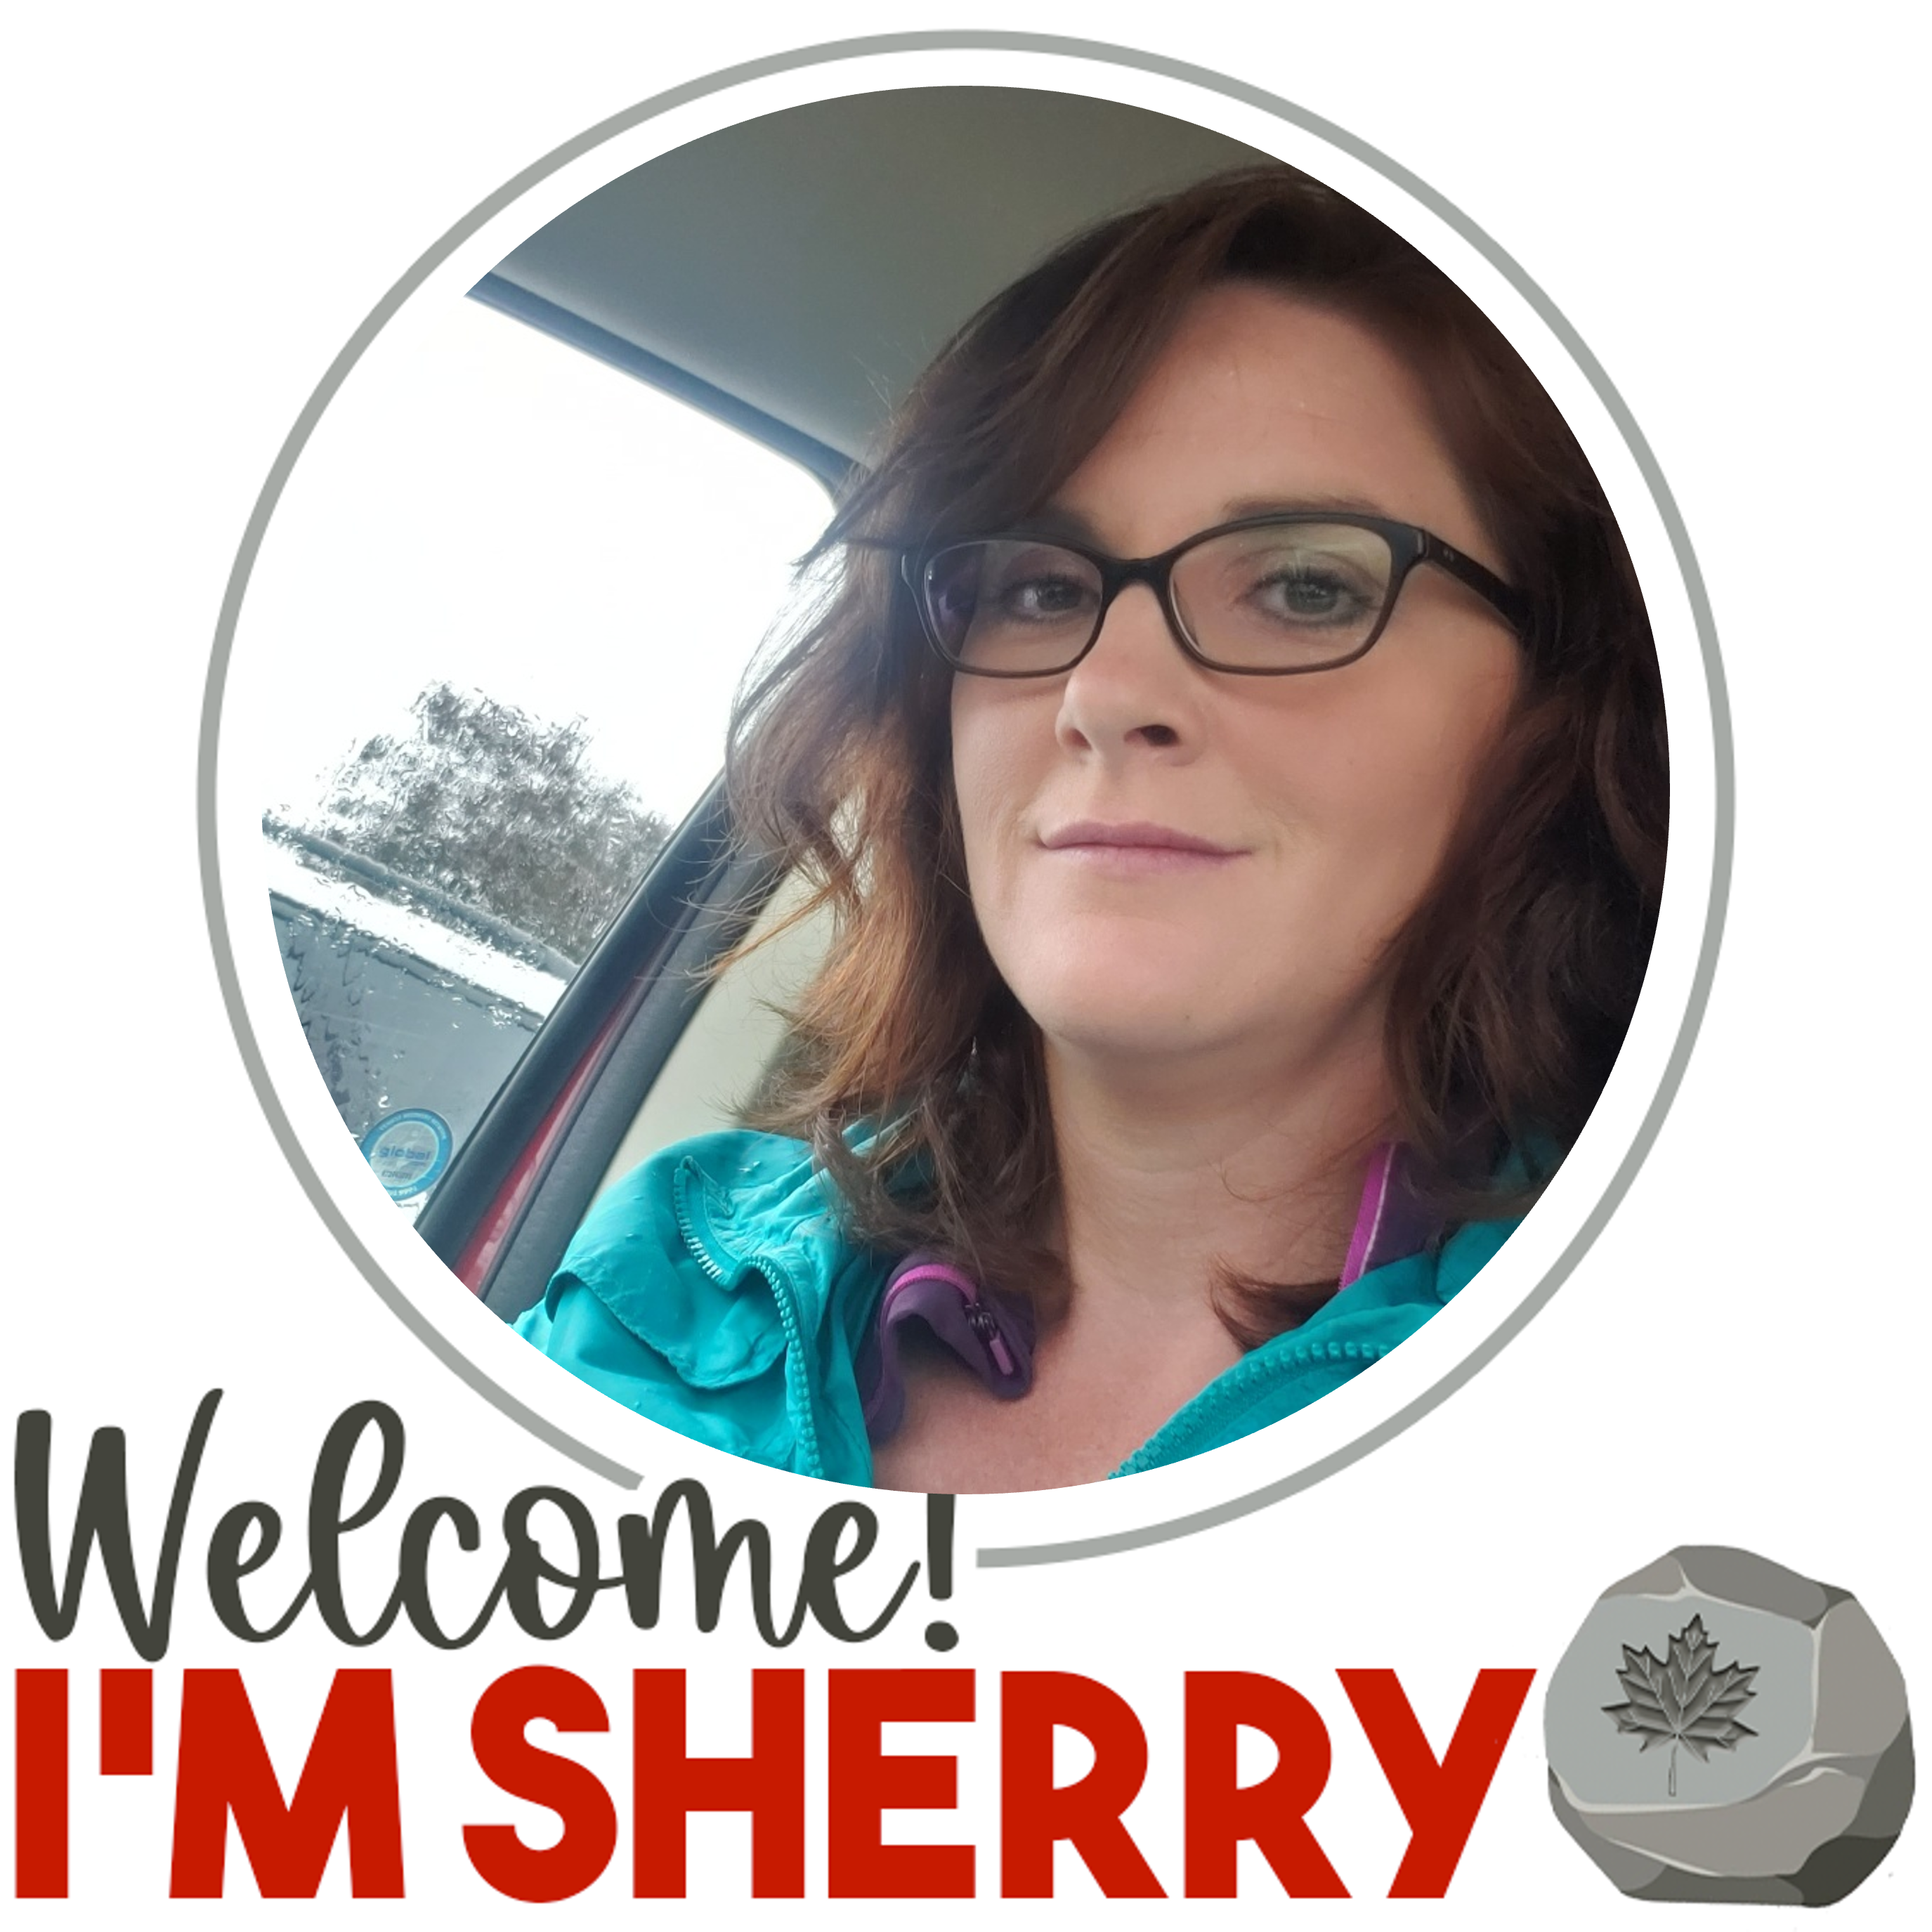 Sherry's picture inside of circle . Welcome text and rock image with maple leaf in centre.